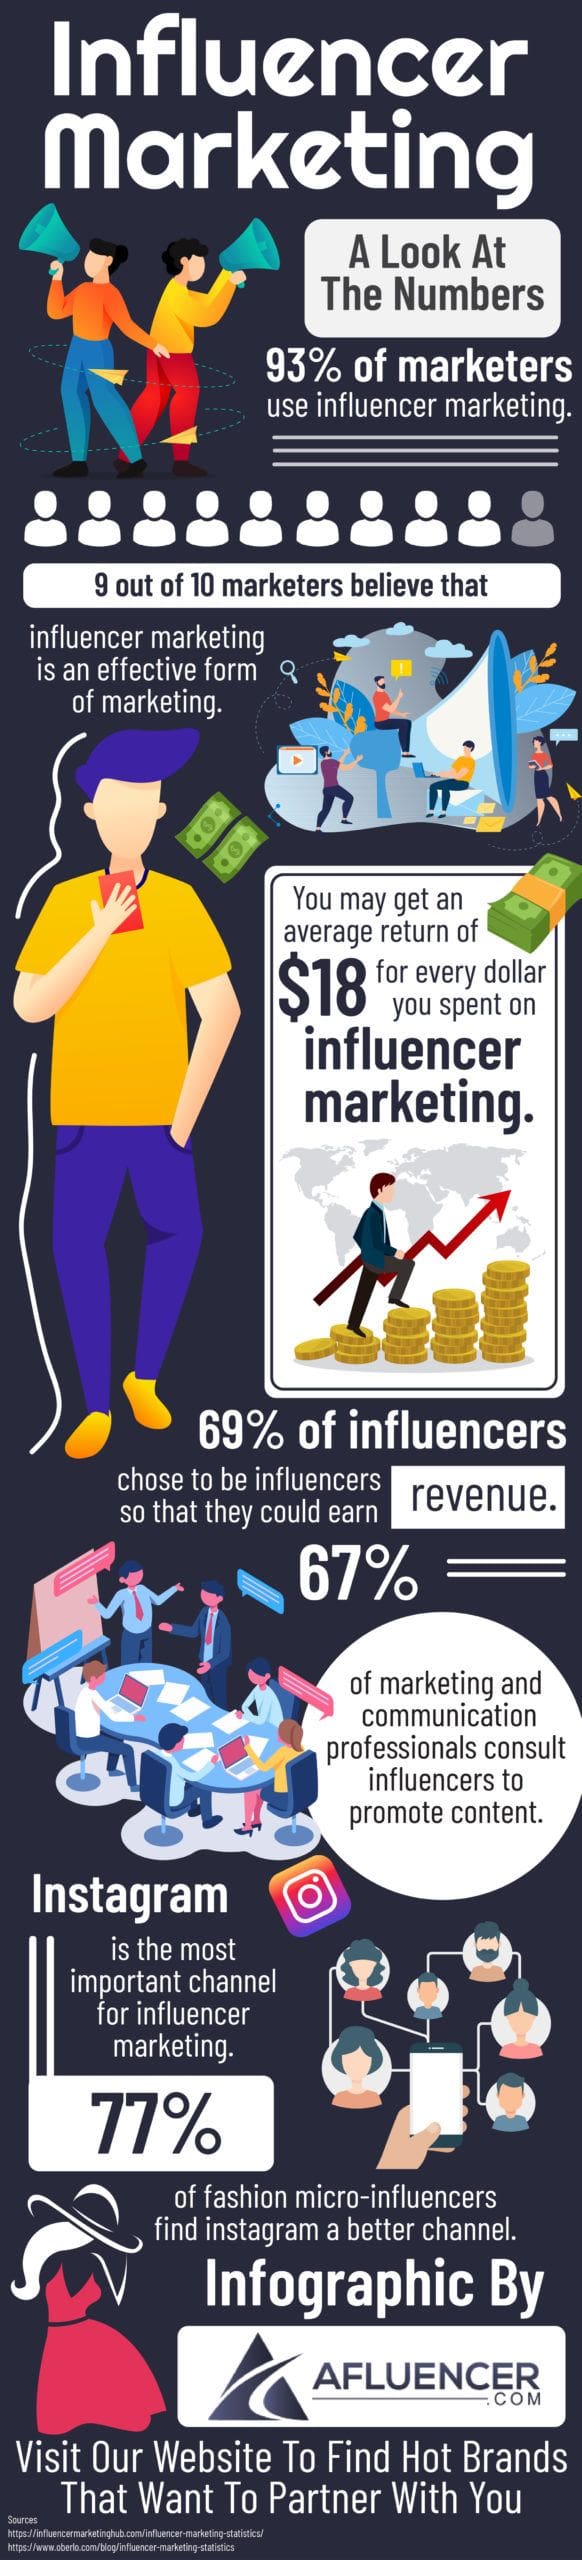 Influencer-Marketing-for-2021-A-Look-At-The-Numbers - Afluencer